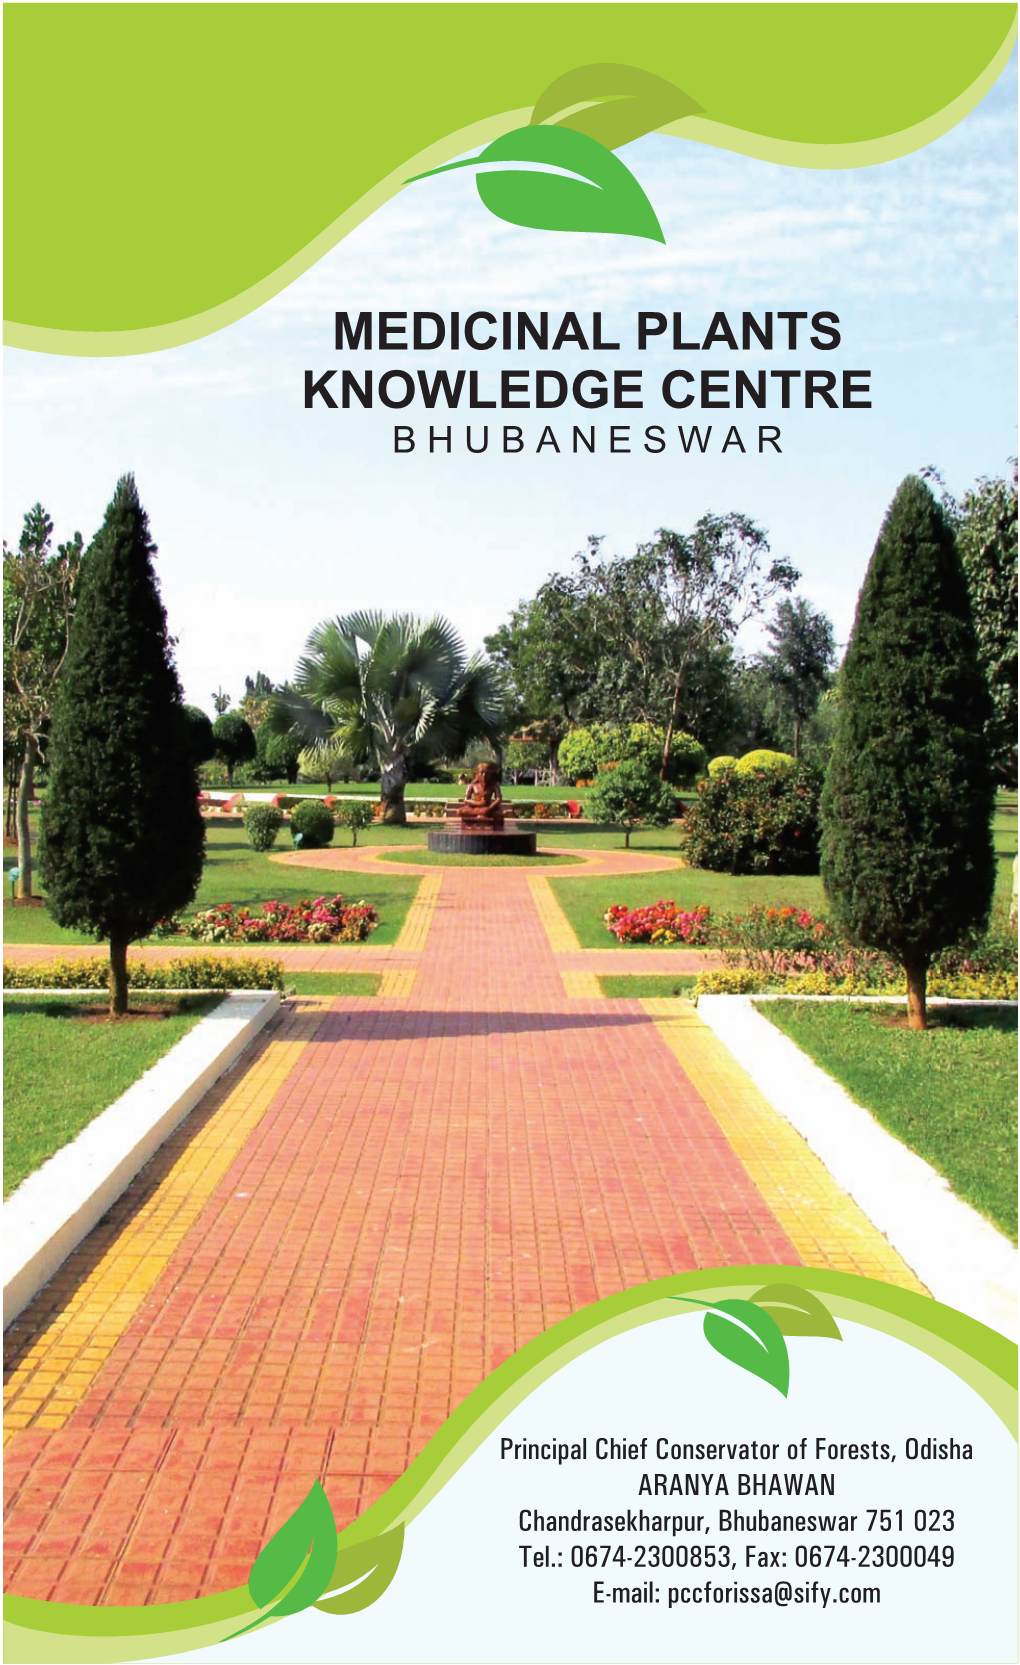 The Medicinal Plants Knowledge Centre Has Been Set up on 60 Hectares of Land by the Side of NH-5 at Patrapada Within the City Limits of Bhubaneswar